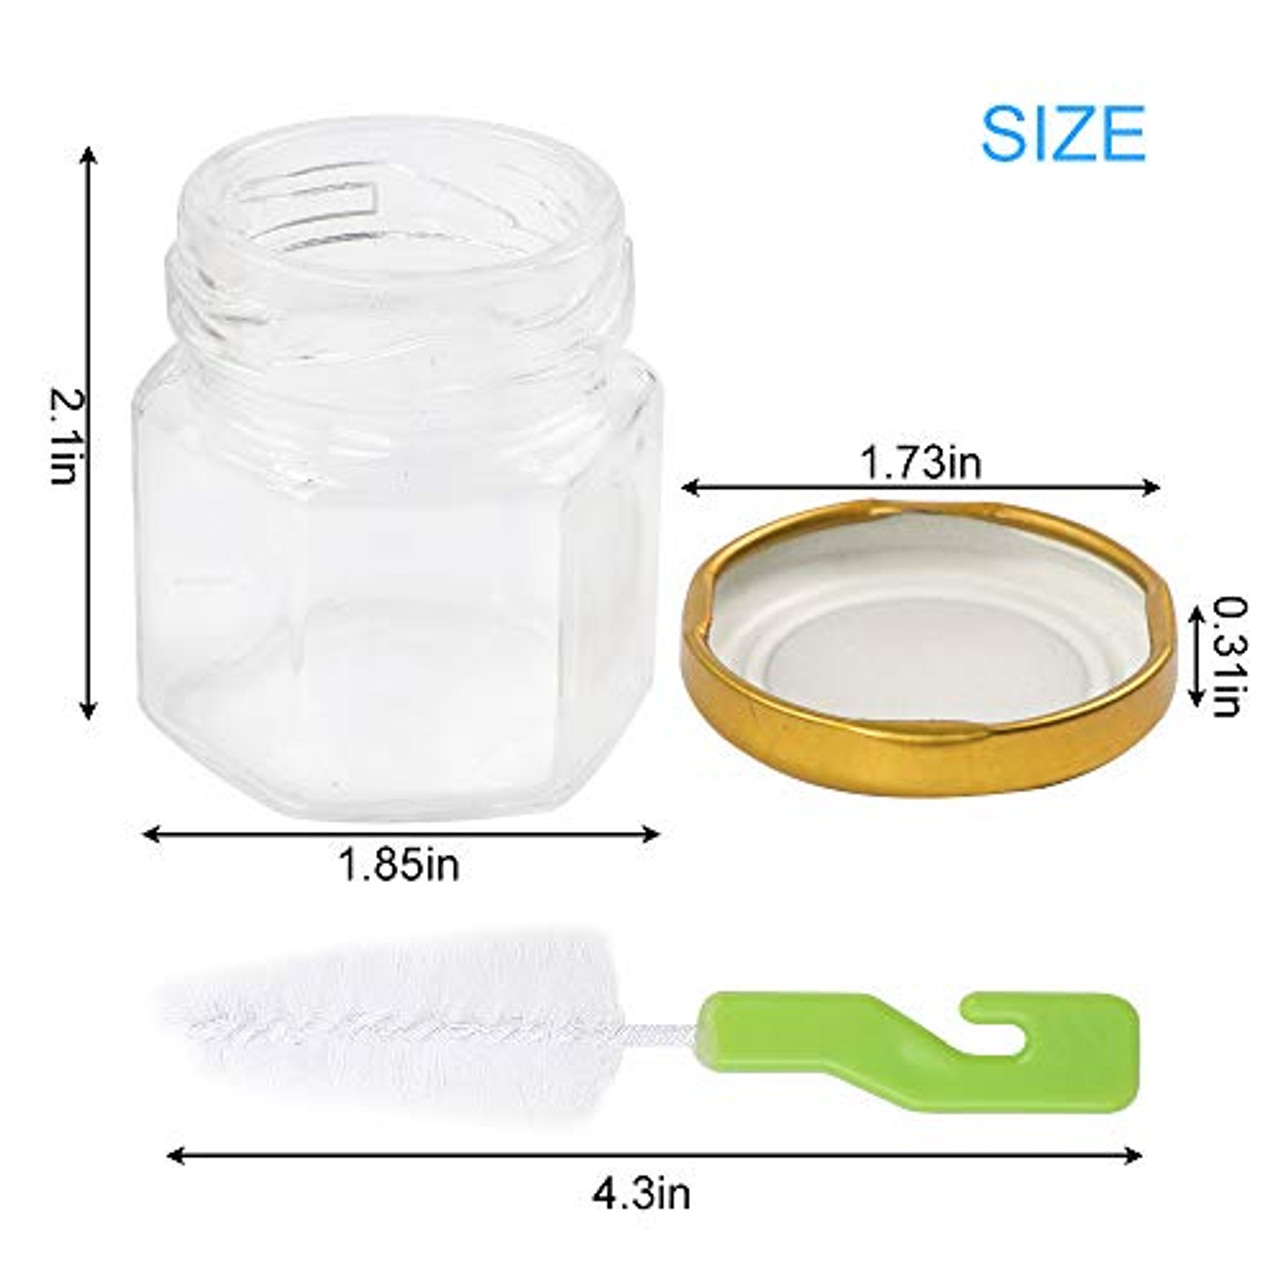 30pcs 1.5oz Hexagon Mini Glass Jars with Gold Lids, Honey Jars Small Spice  Jars Mason Jars For Herbs with 80pcs Stickers, 2pcs Brush for Spices